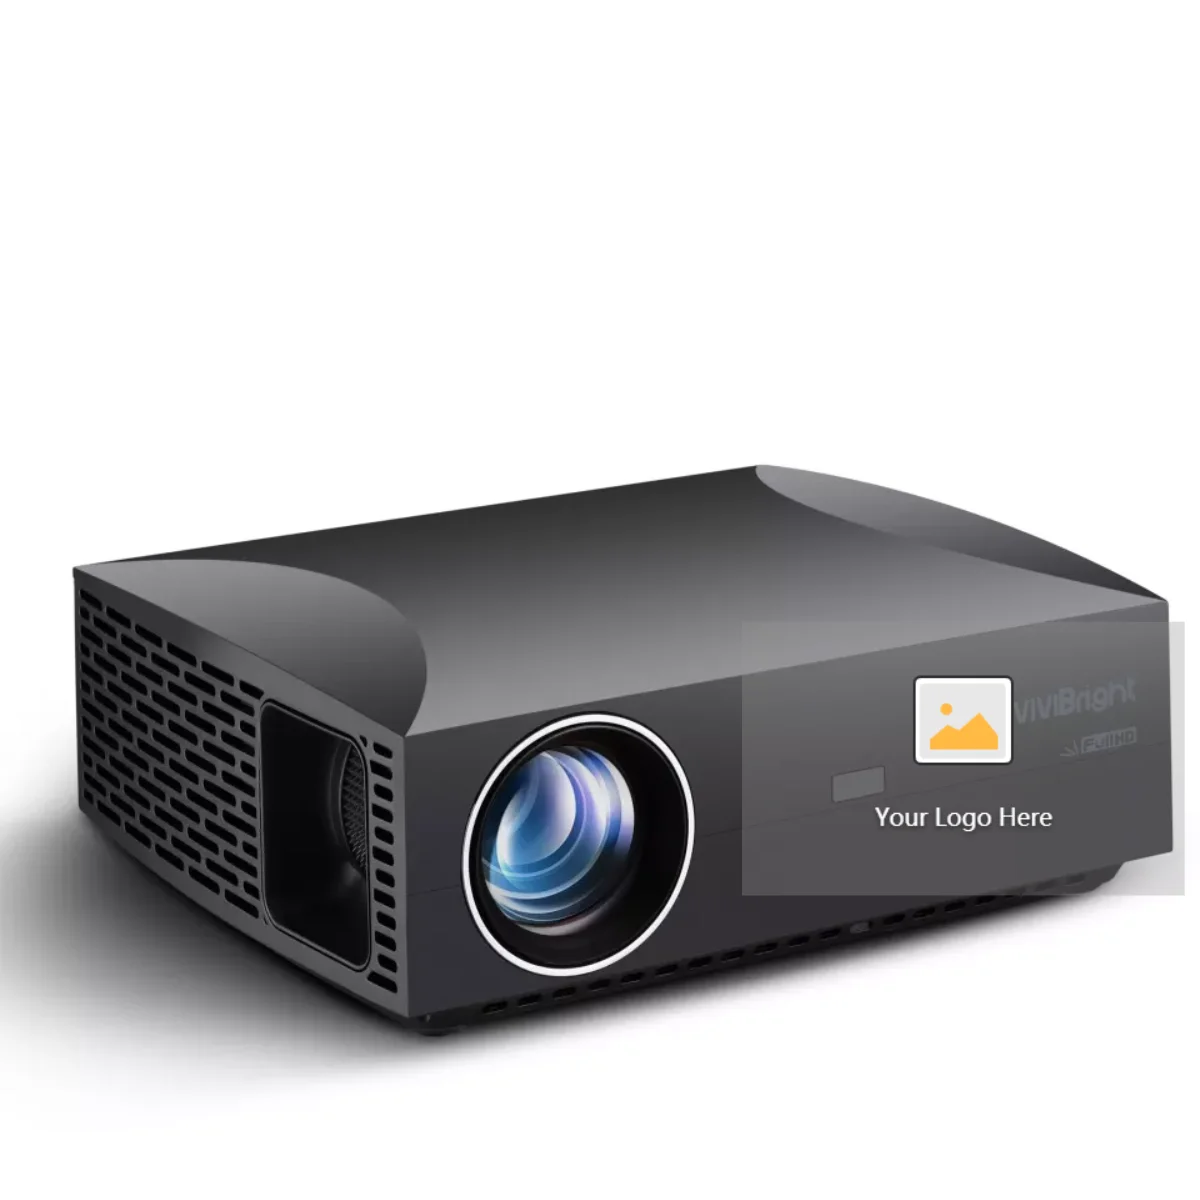 

VIVIBRIGHT F30 LED light Projector multimedia 1080P Projectors up to 5000 lumens for home thearter